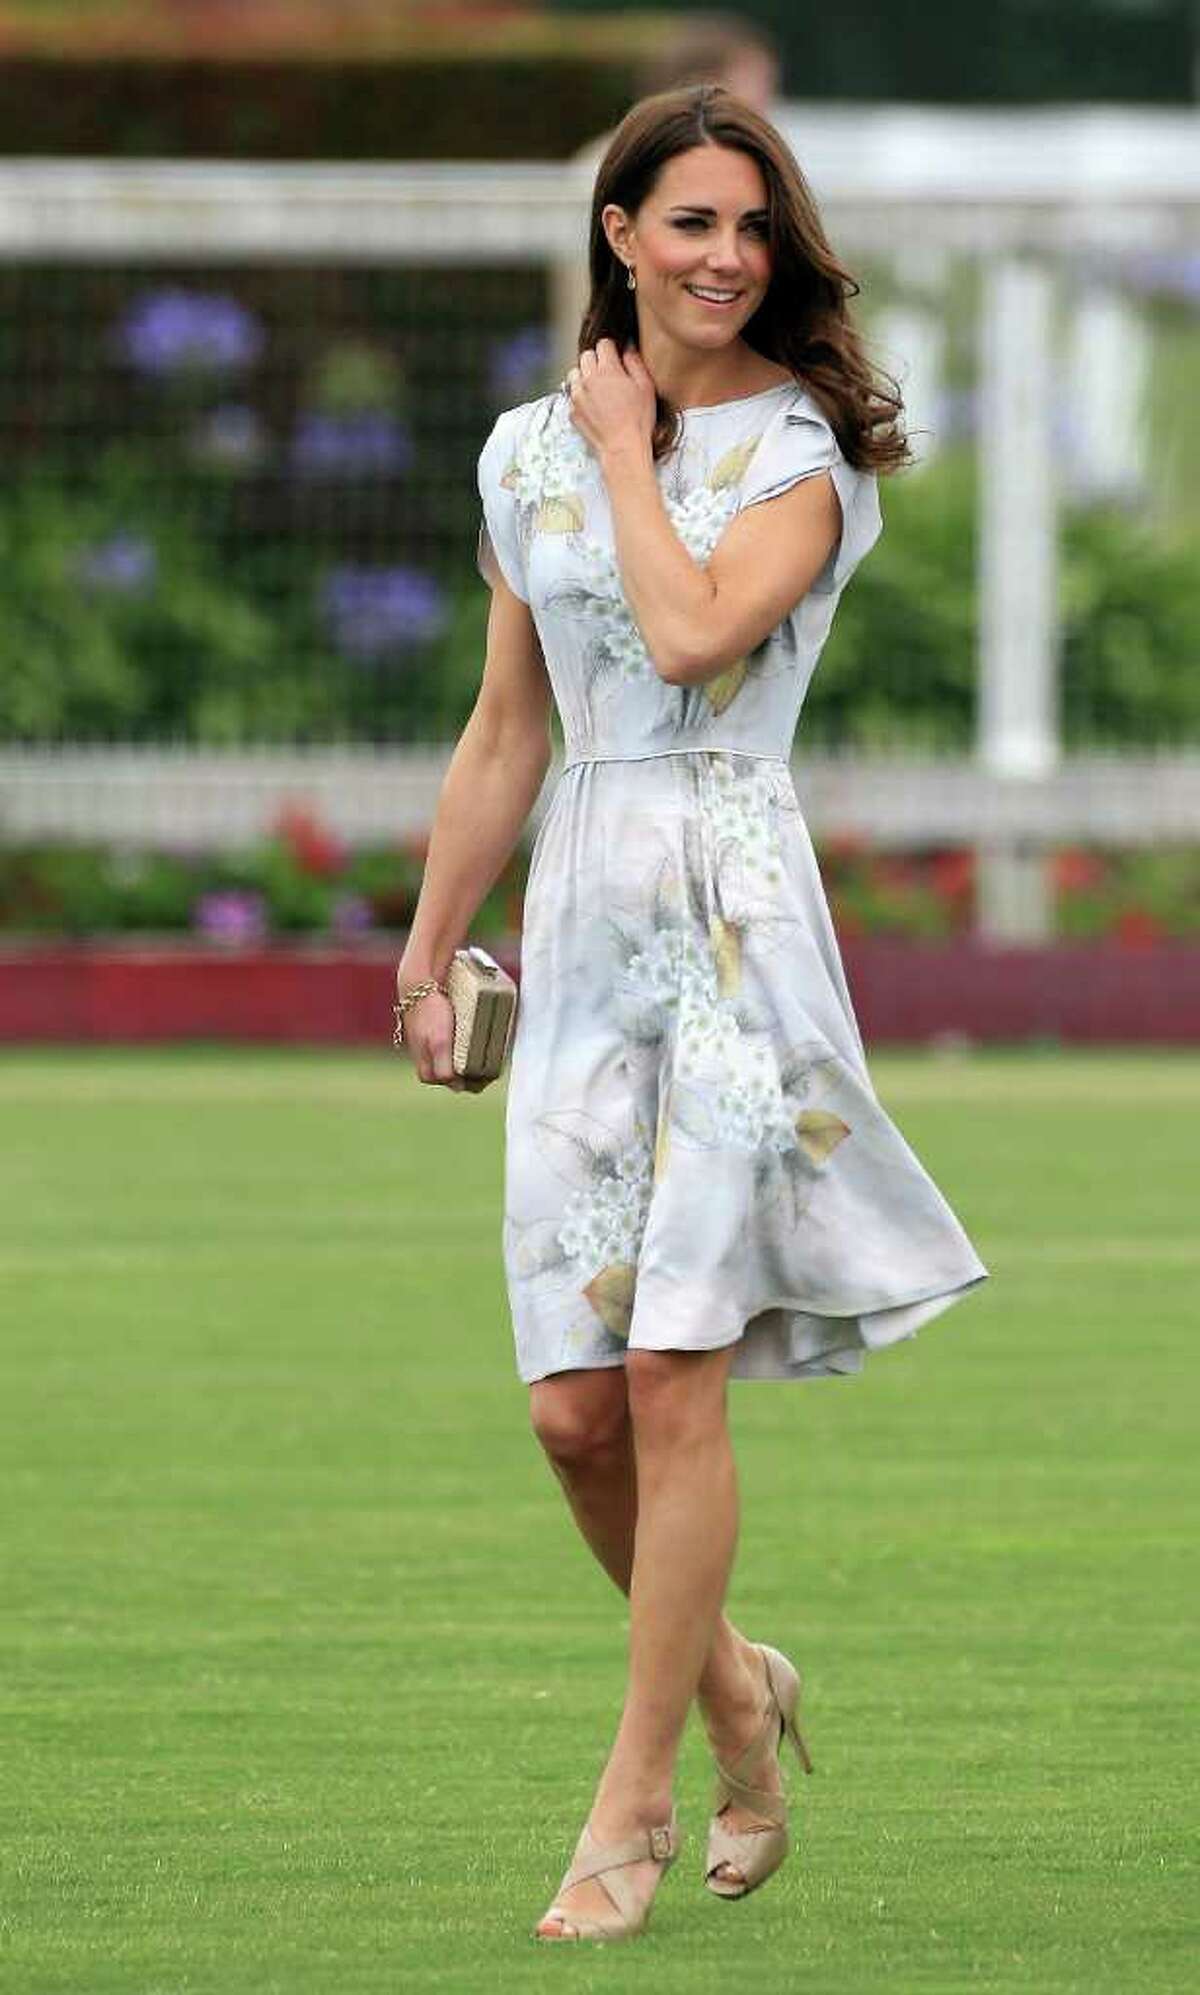 The Duchess presented her husband's winning team with a trophy at a charity polo match in Santa Barbara, California. She wore a hand painted Jenny Packham silk dress for the occasion.